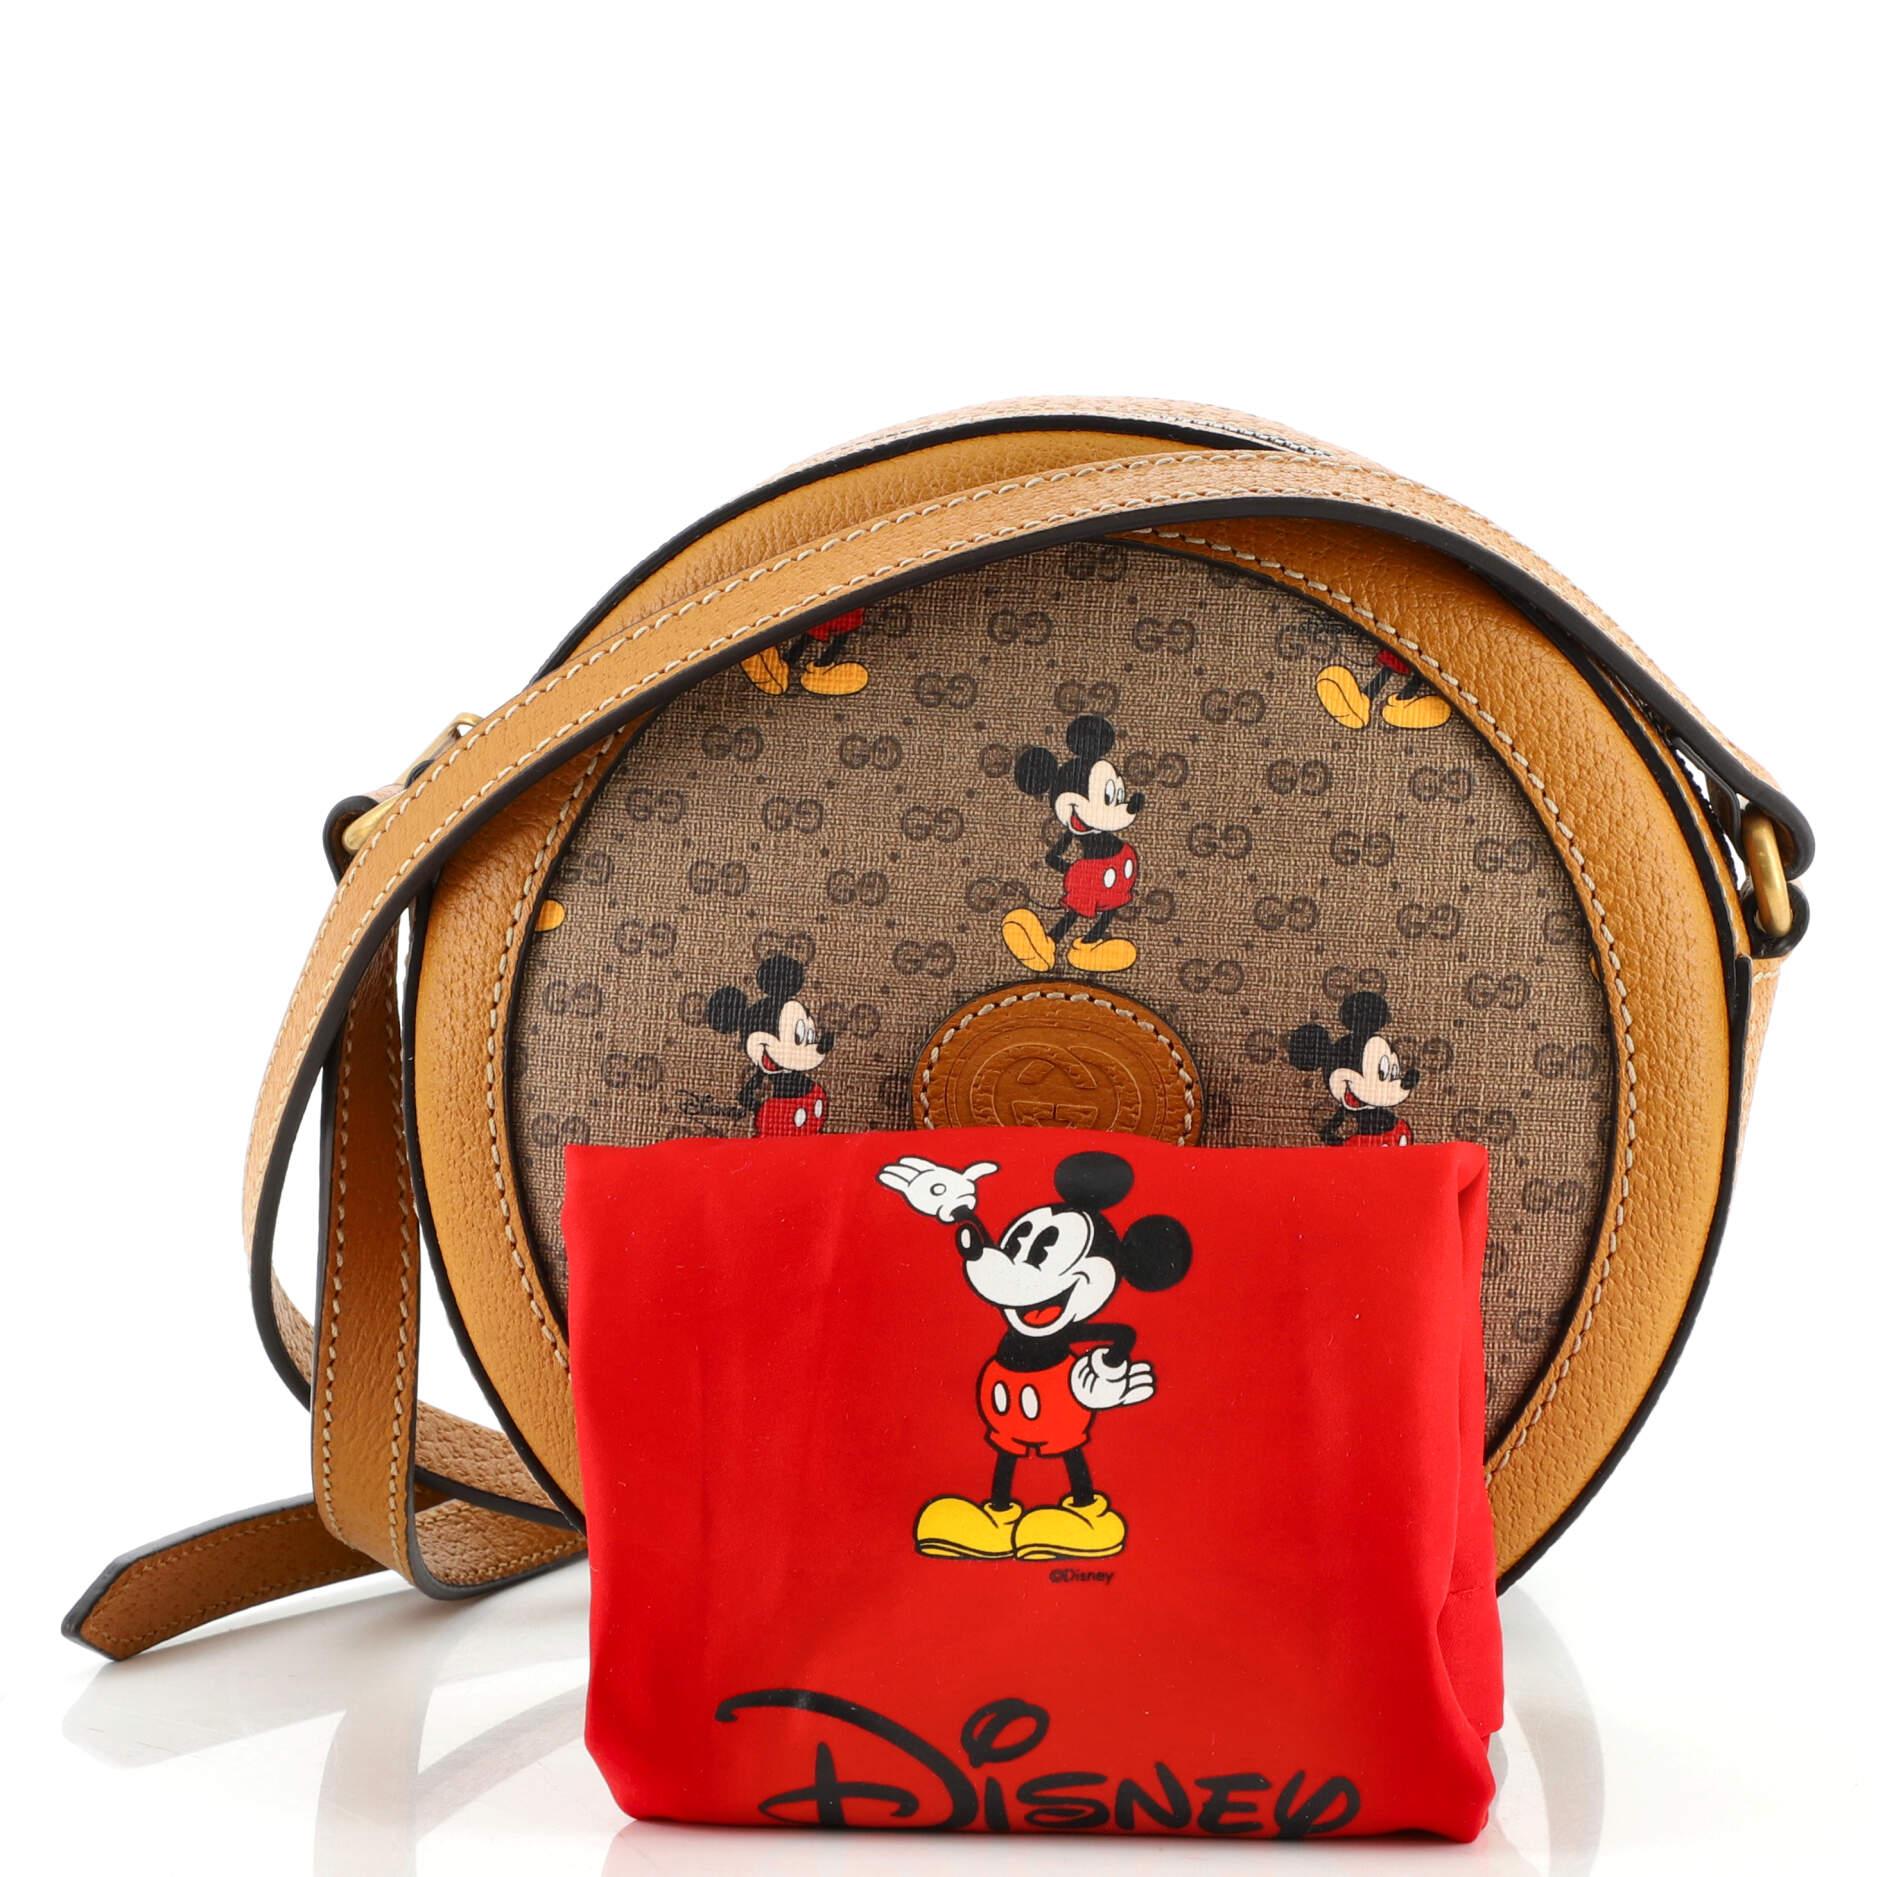 GUCCI Mickey Mouse Round Shoulder Bag, Women's Fashion, Bags